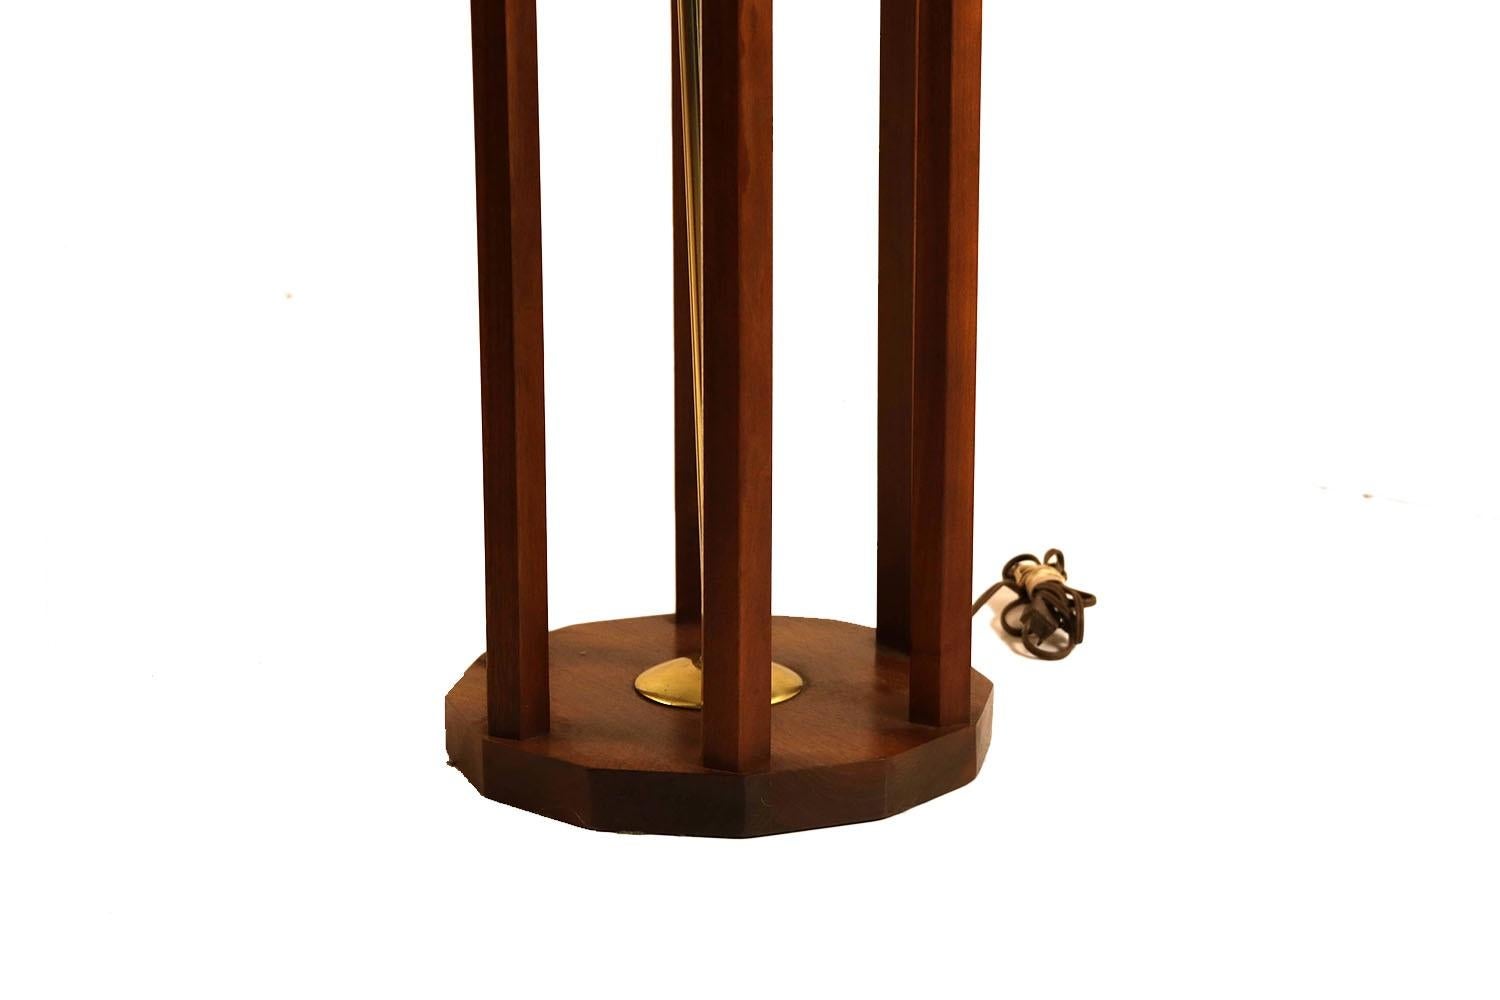 Retro walnut tall table/ floor and smoked Lucite lamp. A rare vintage walnut hexagon shaped tall table/ floor lamp with angled smoked Lucite shades. This unusual hexagon shaped lamp features six walnut angled upright supports that house angled